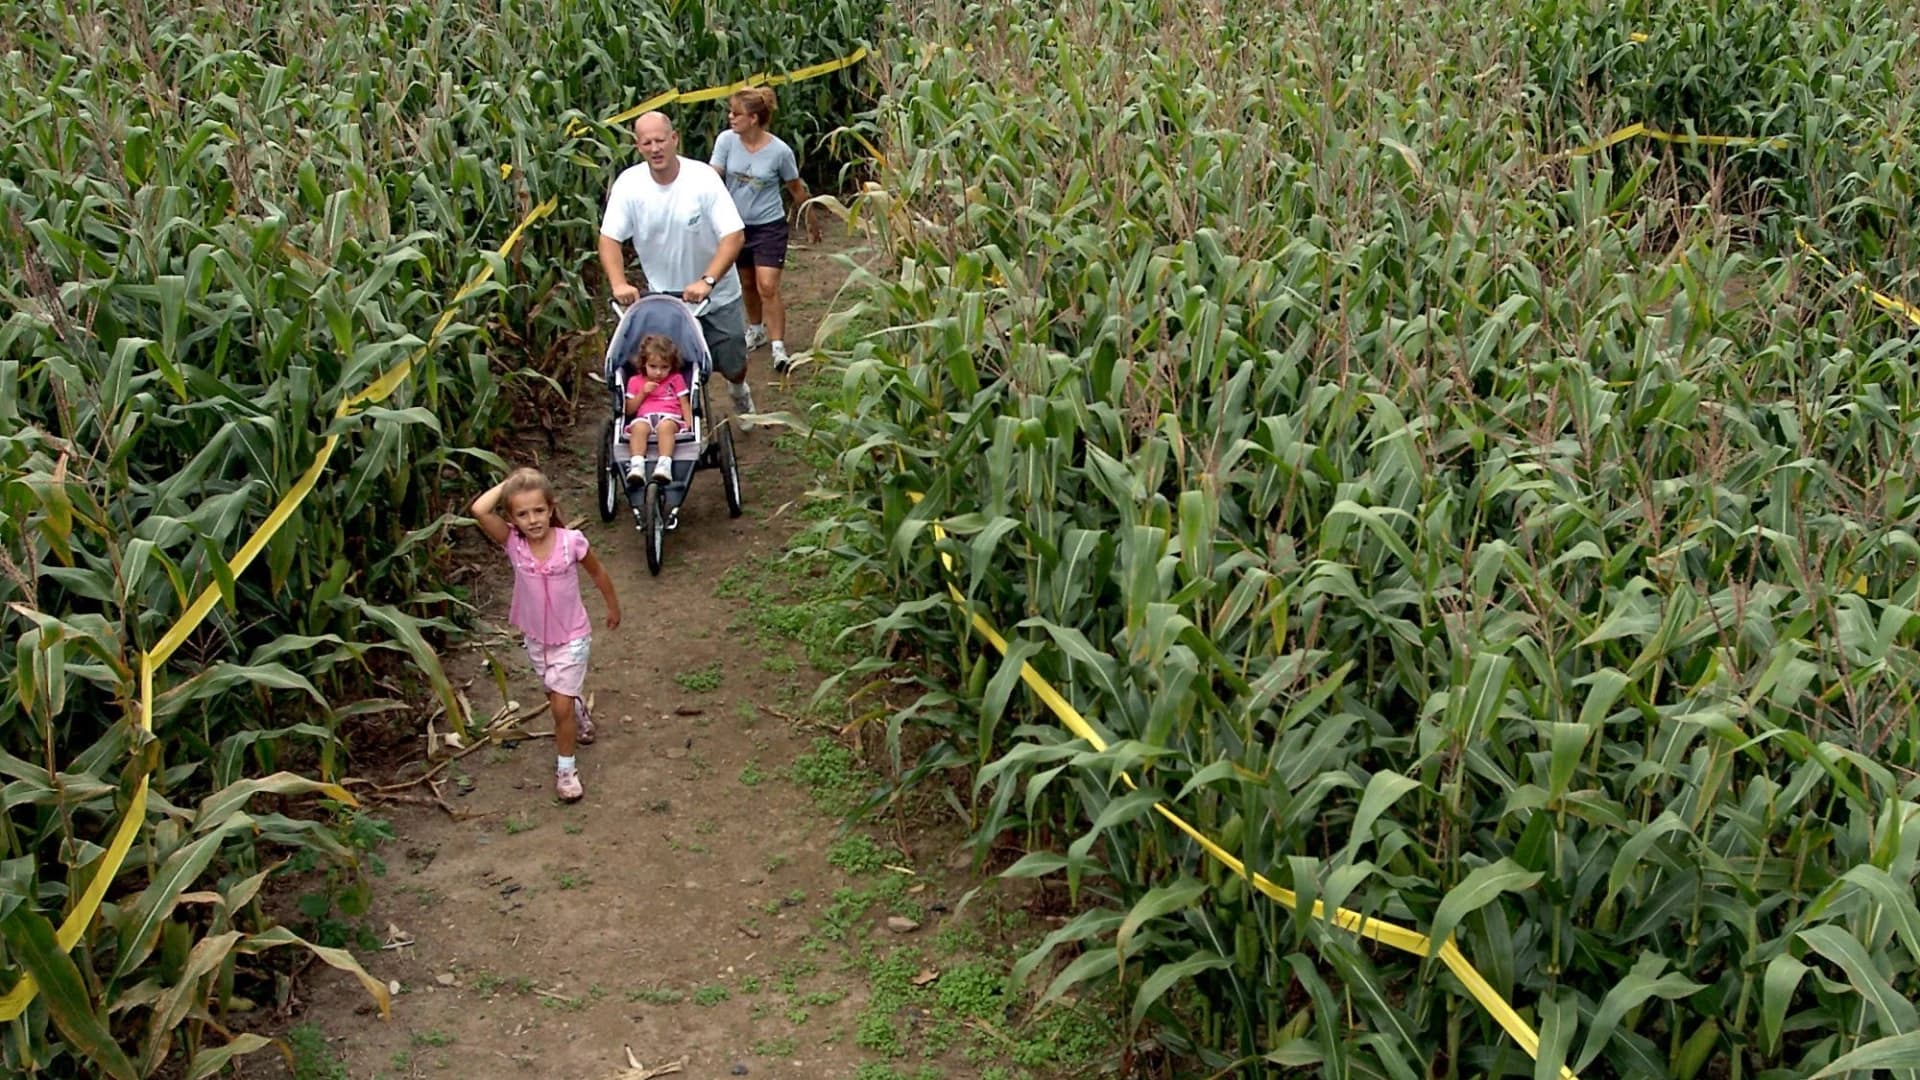 Guide: Get lost in these cornfield mazes around Connecticut 